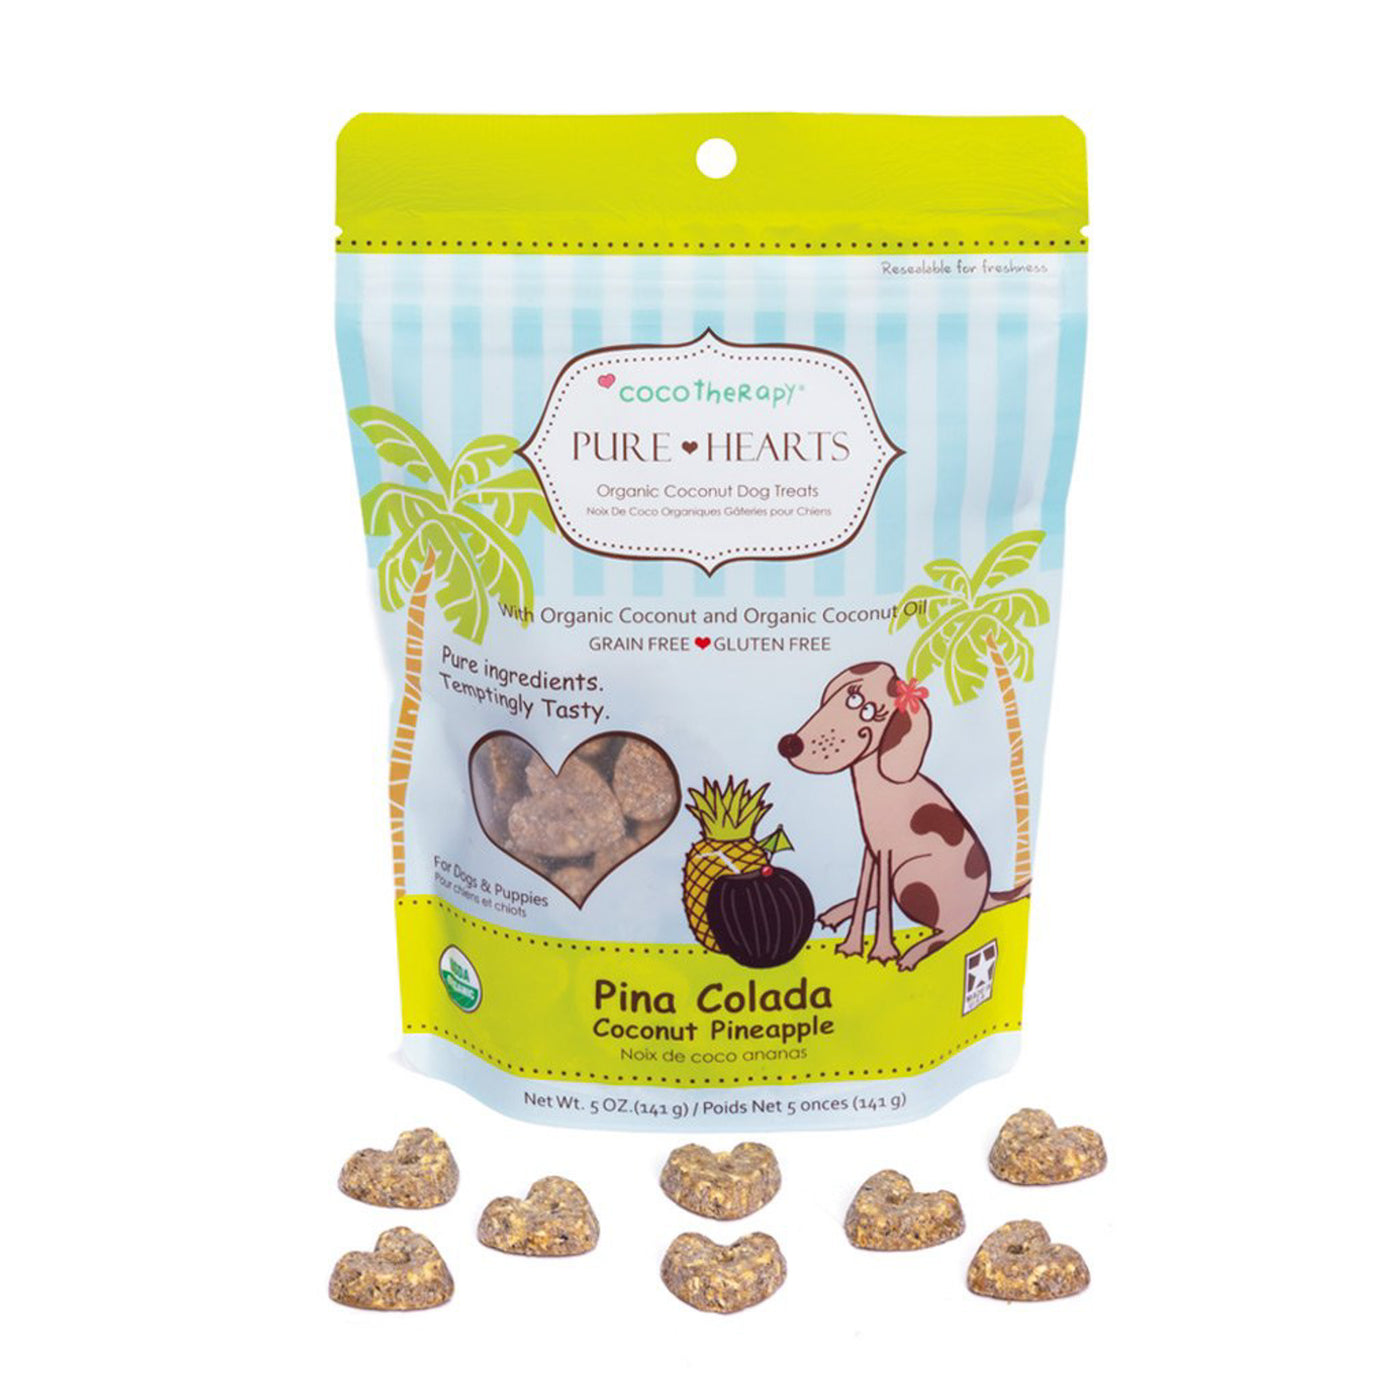 Coco Therapy Pure Hearts Pina Colada dog treats in pouch with treats in front